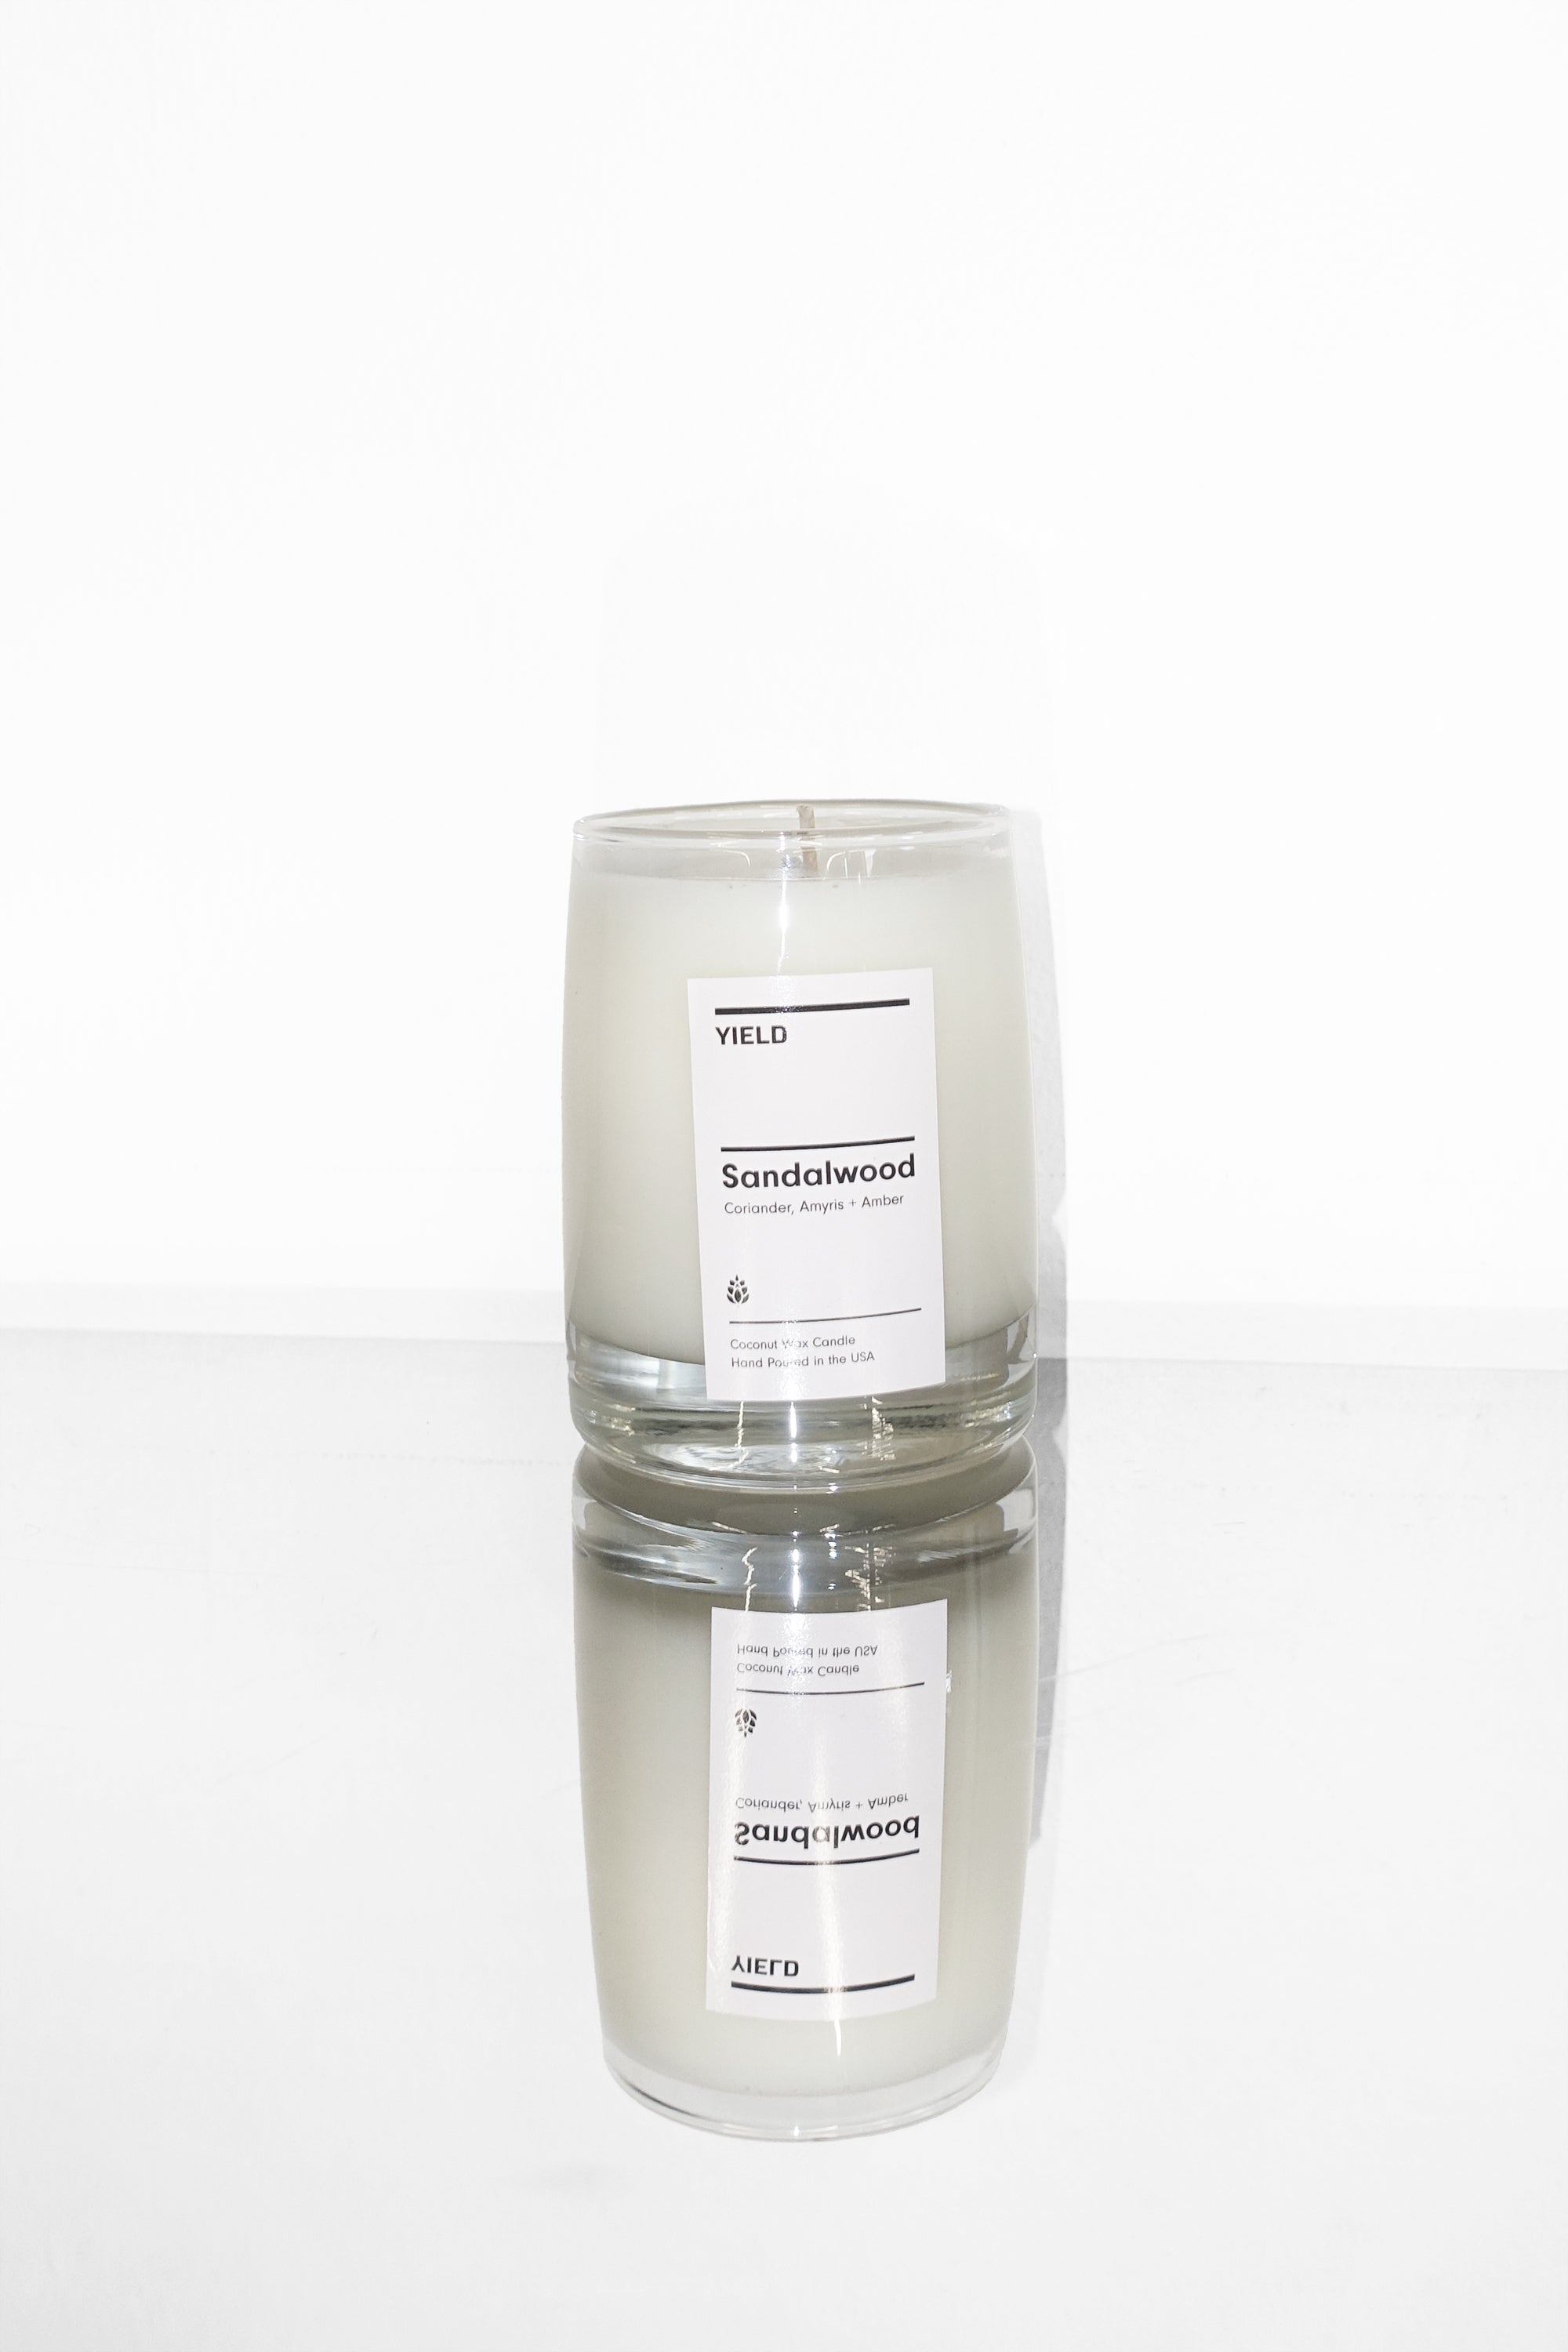 Sandalwood Candle by Yield